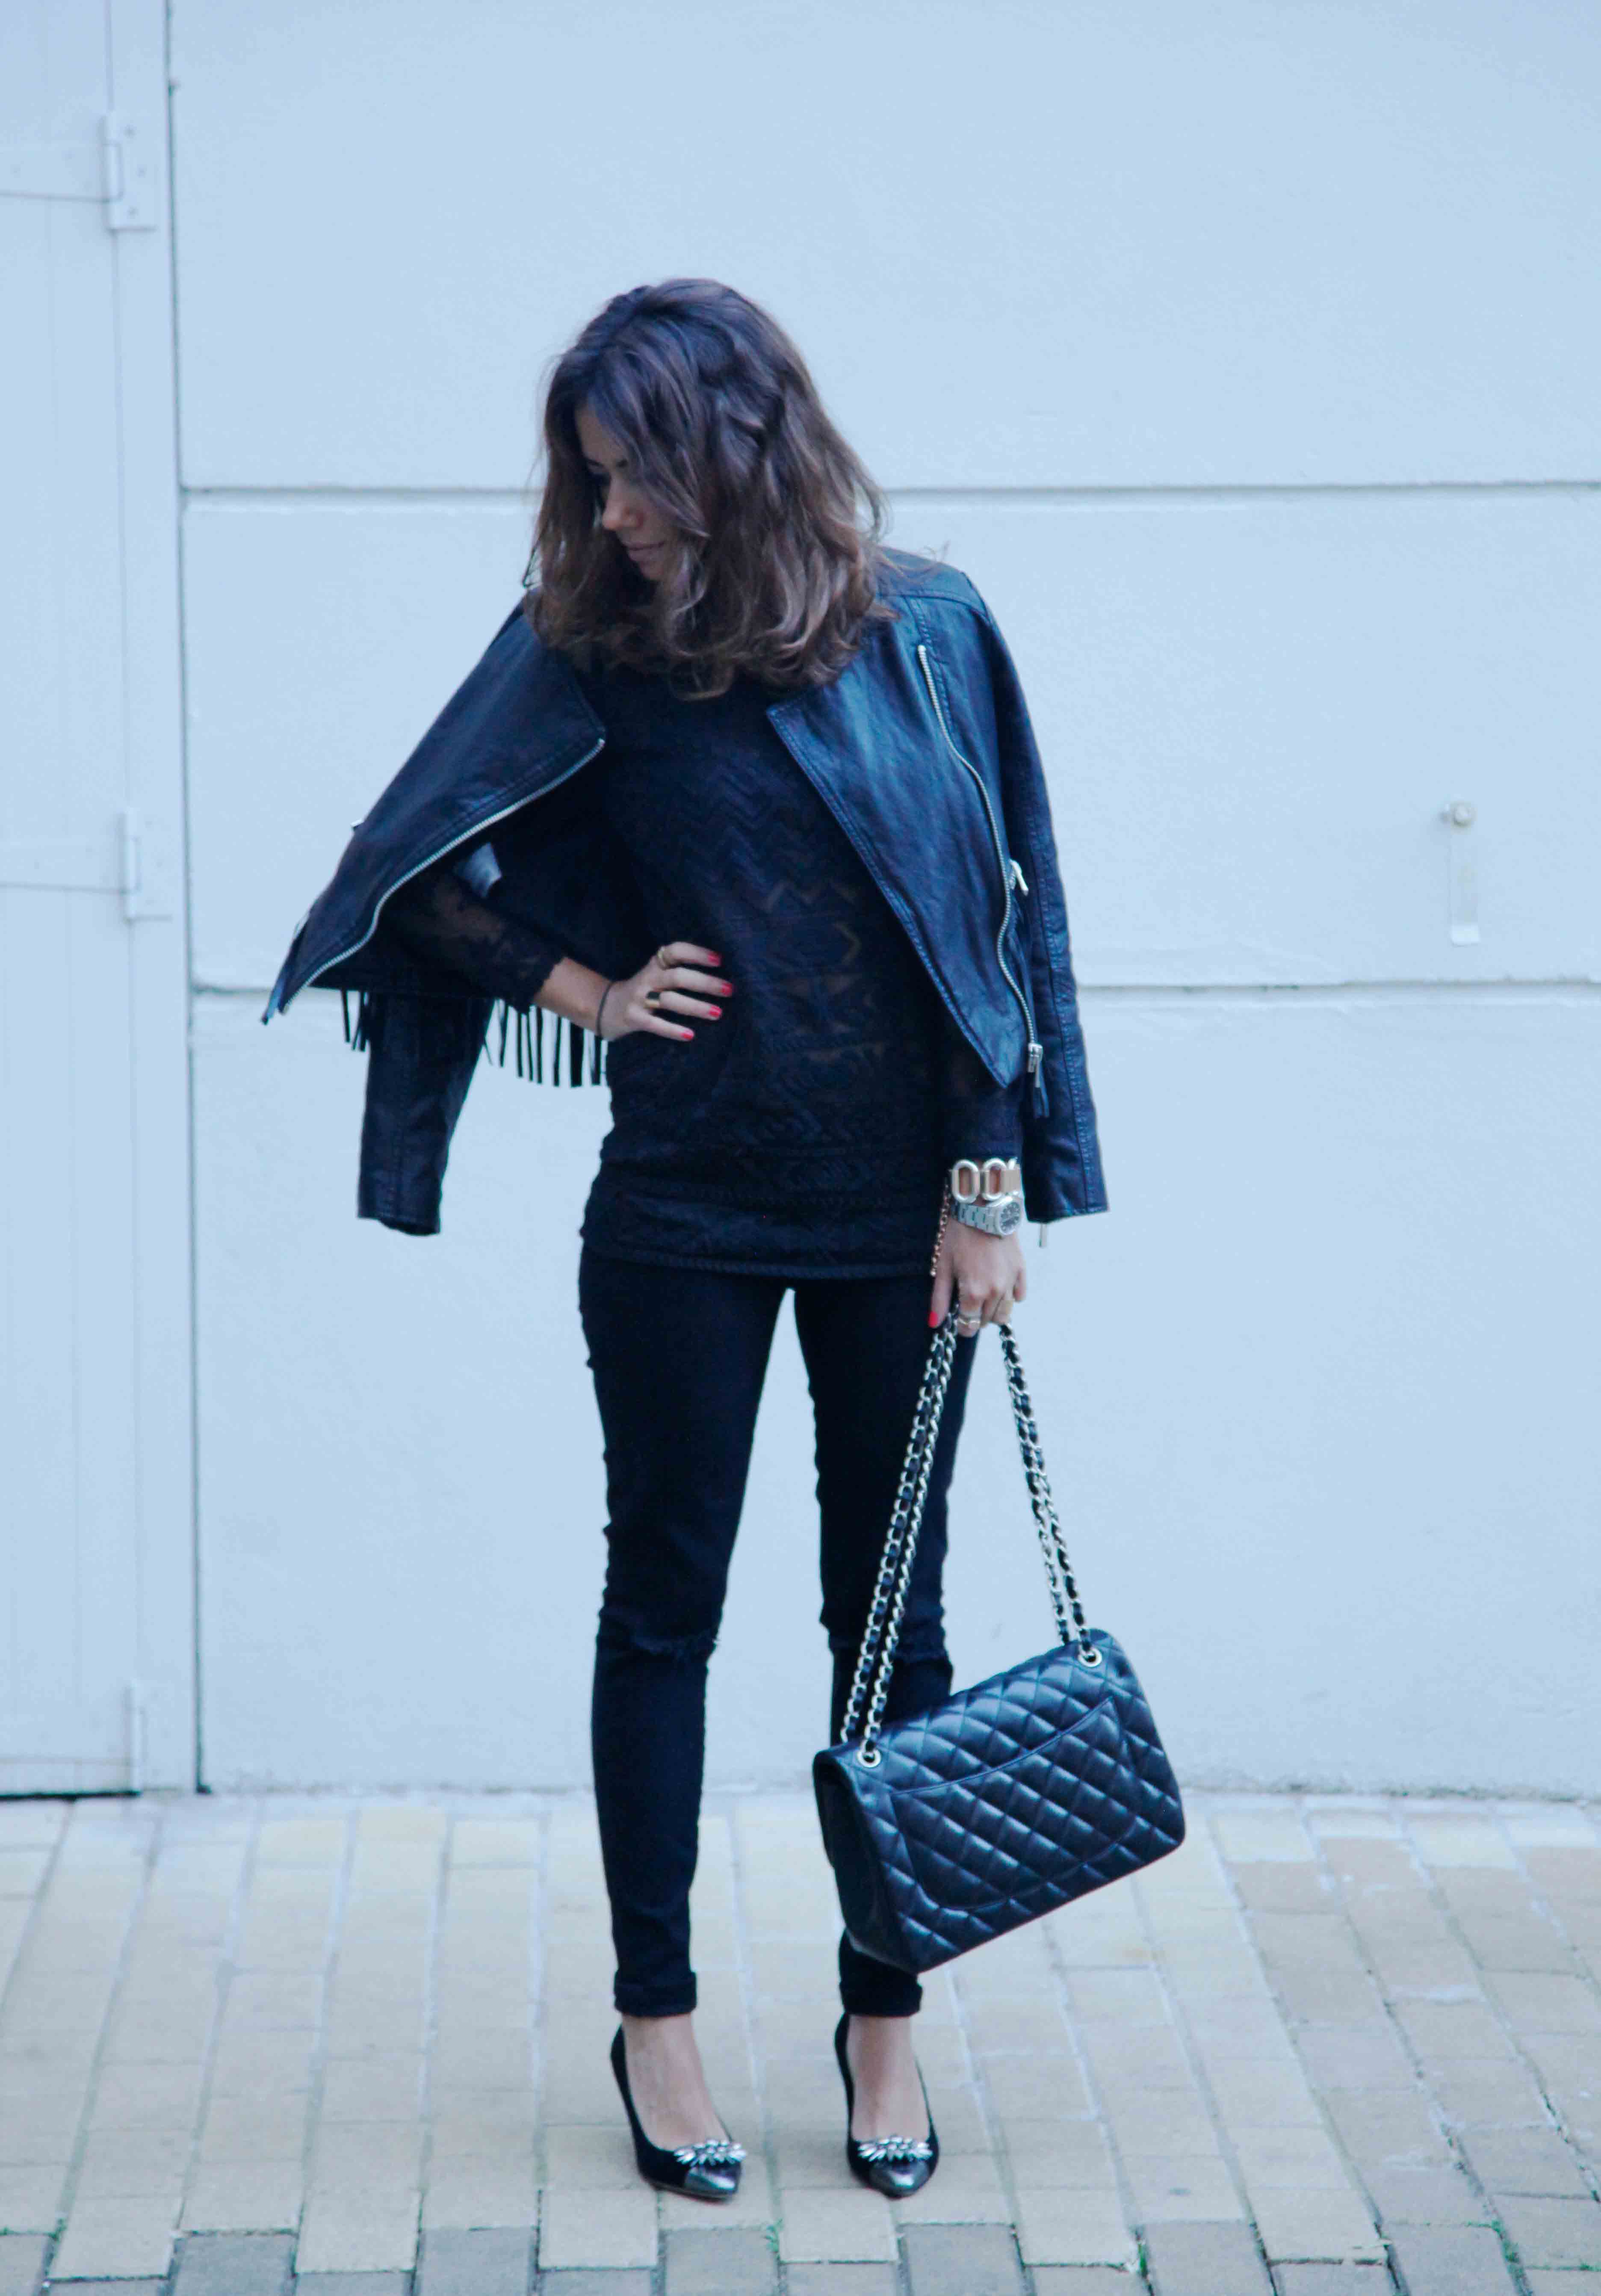 Rock & black outfit